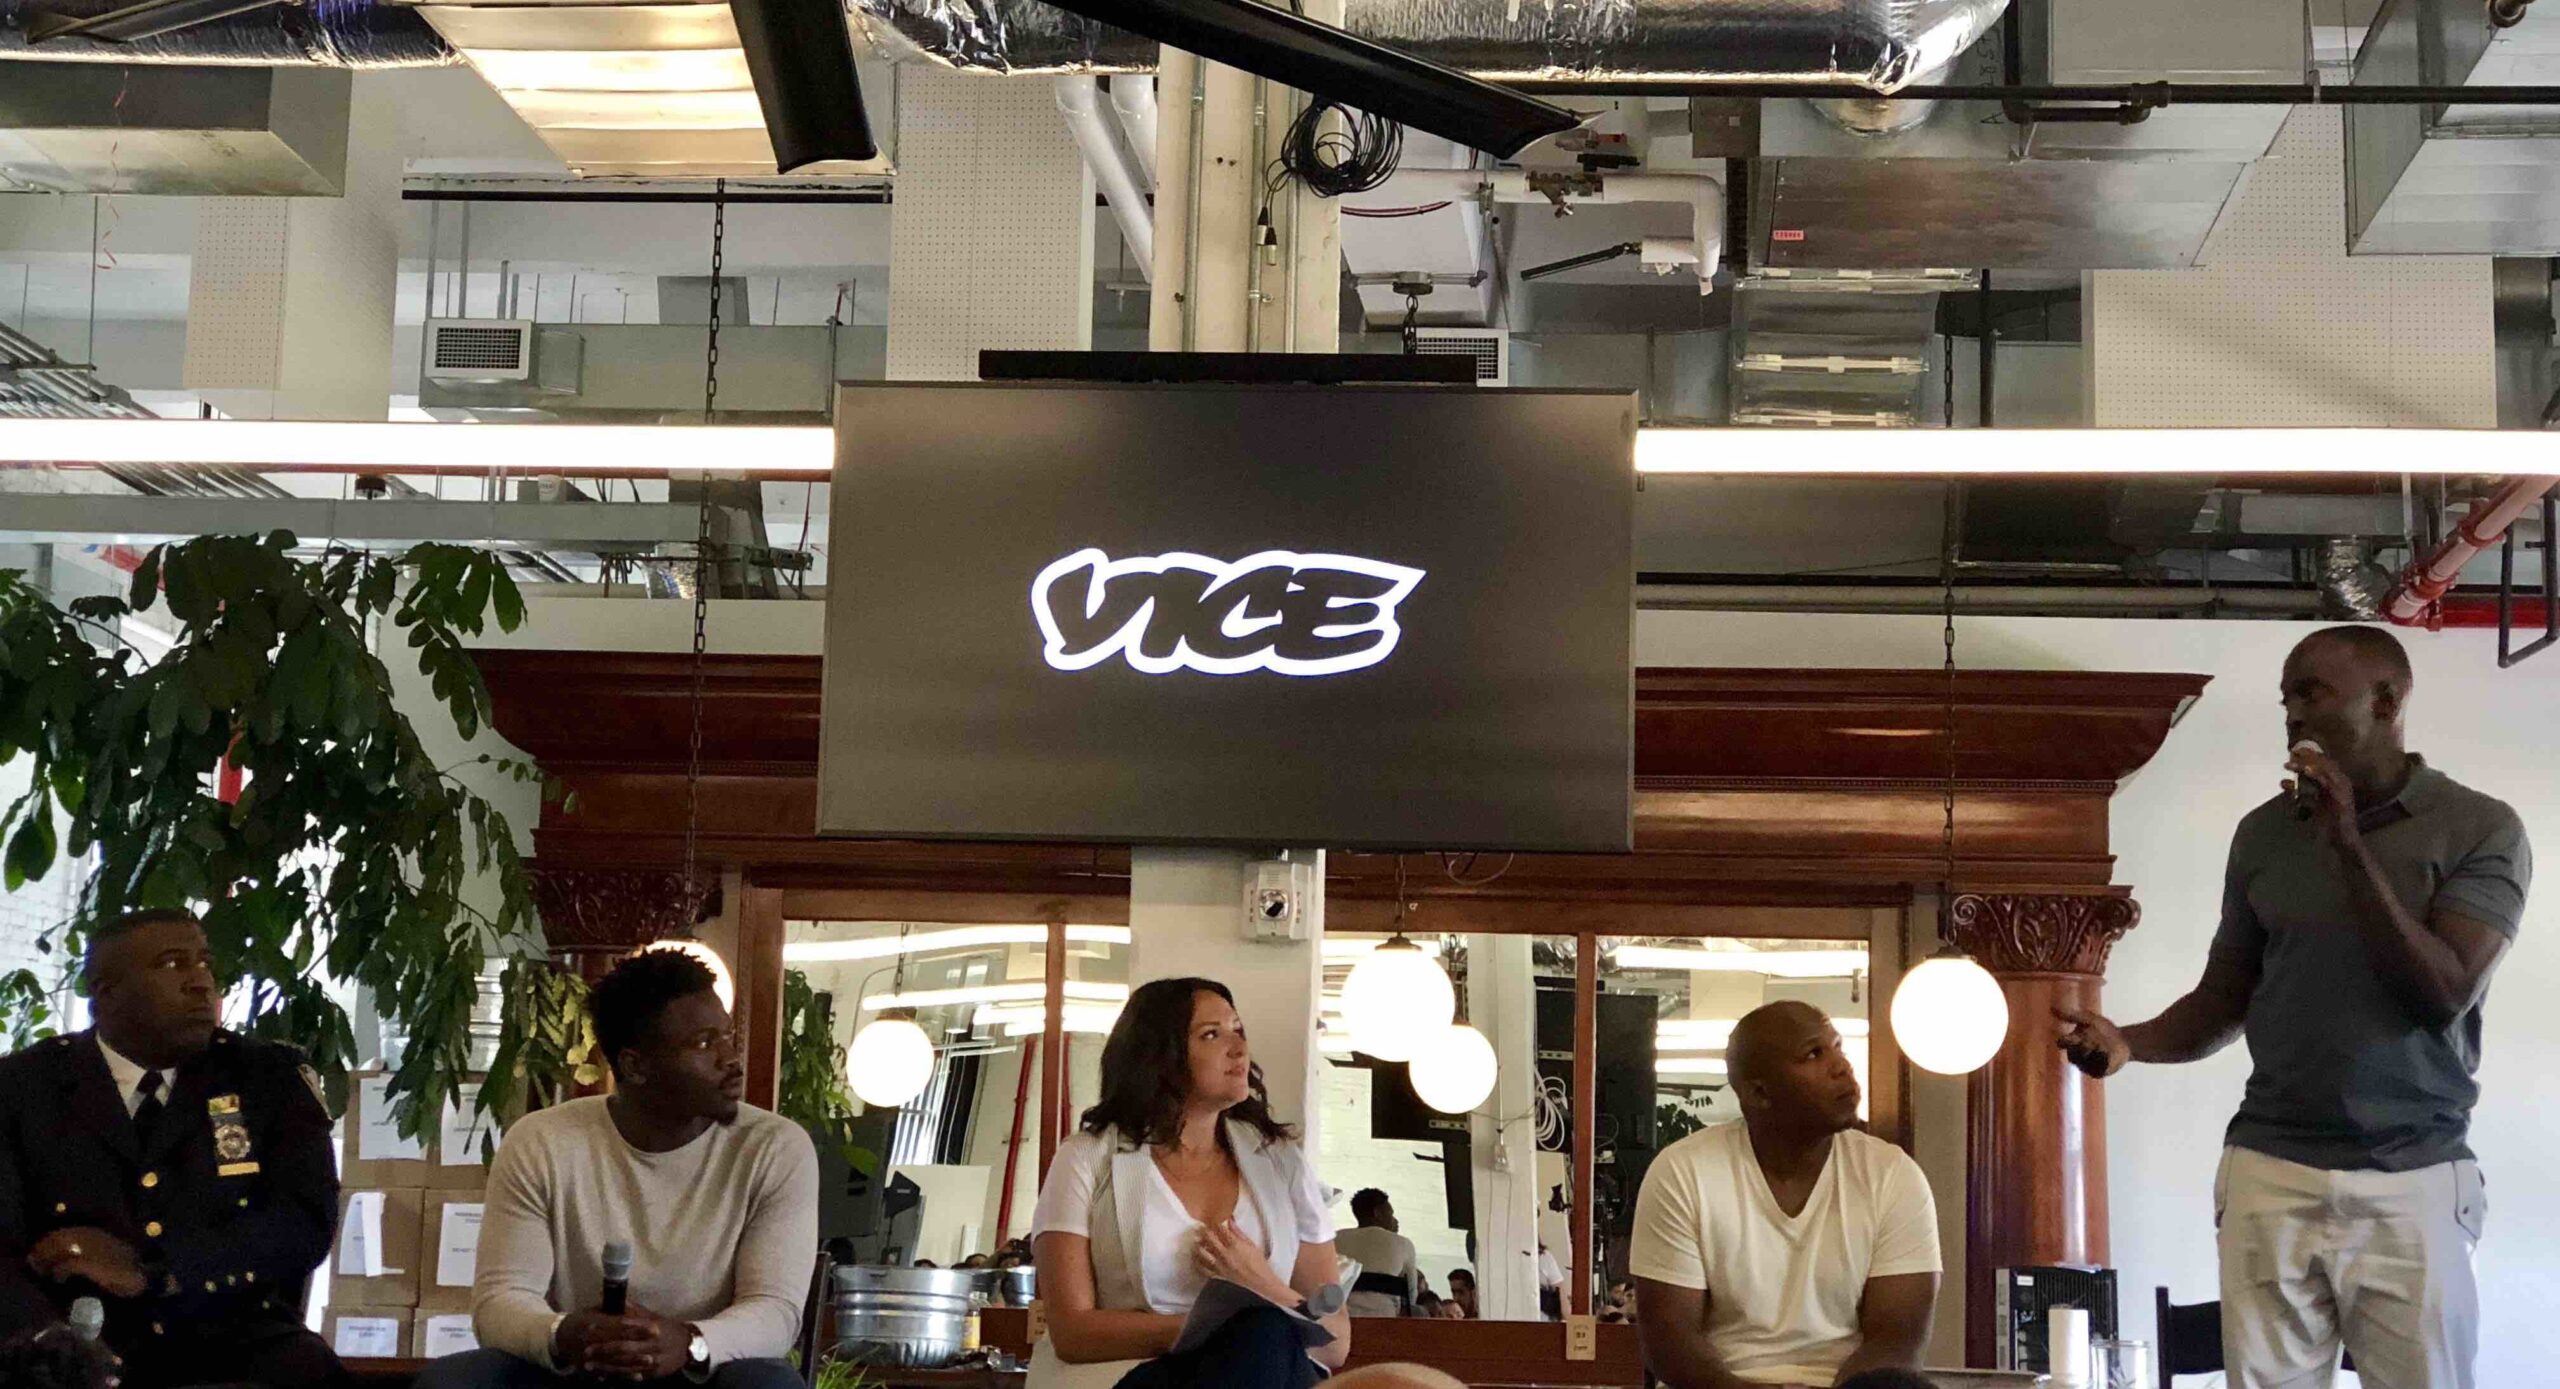 (L-R): Chief Jeffrey Maddrey; Jim St. Germaine; Dominic Dupont; and Michael K Williams speaking on a panel at VICE headquarters.